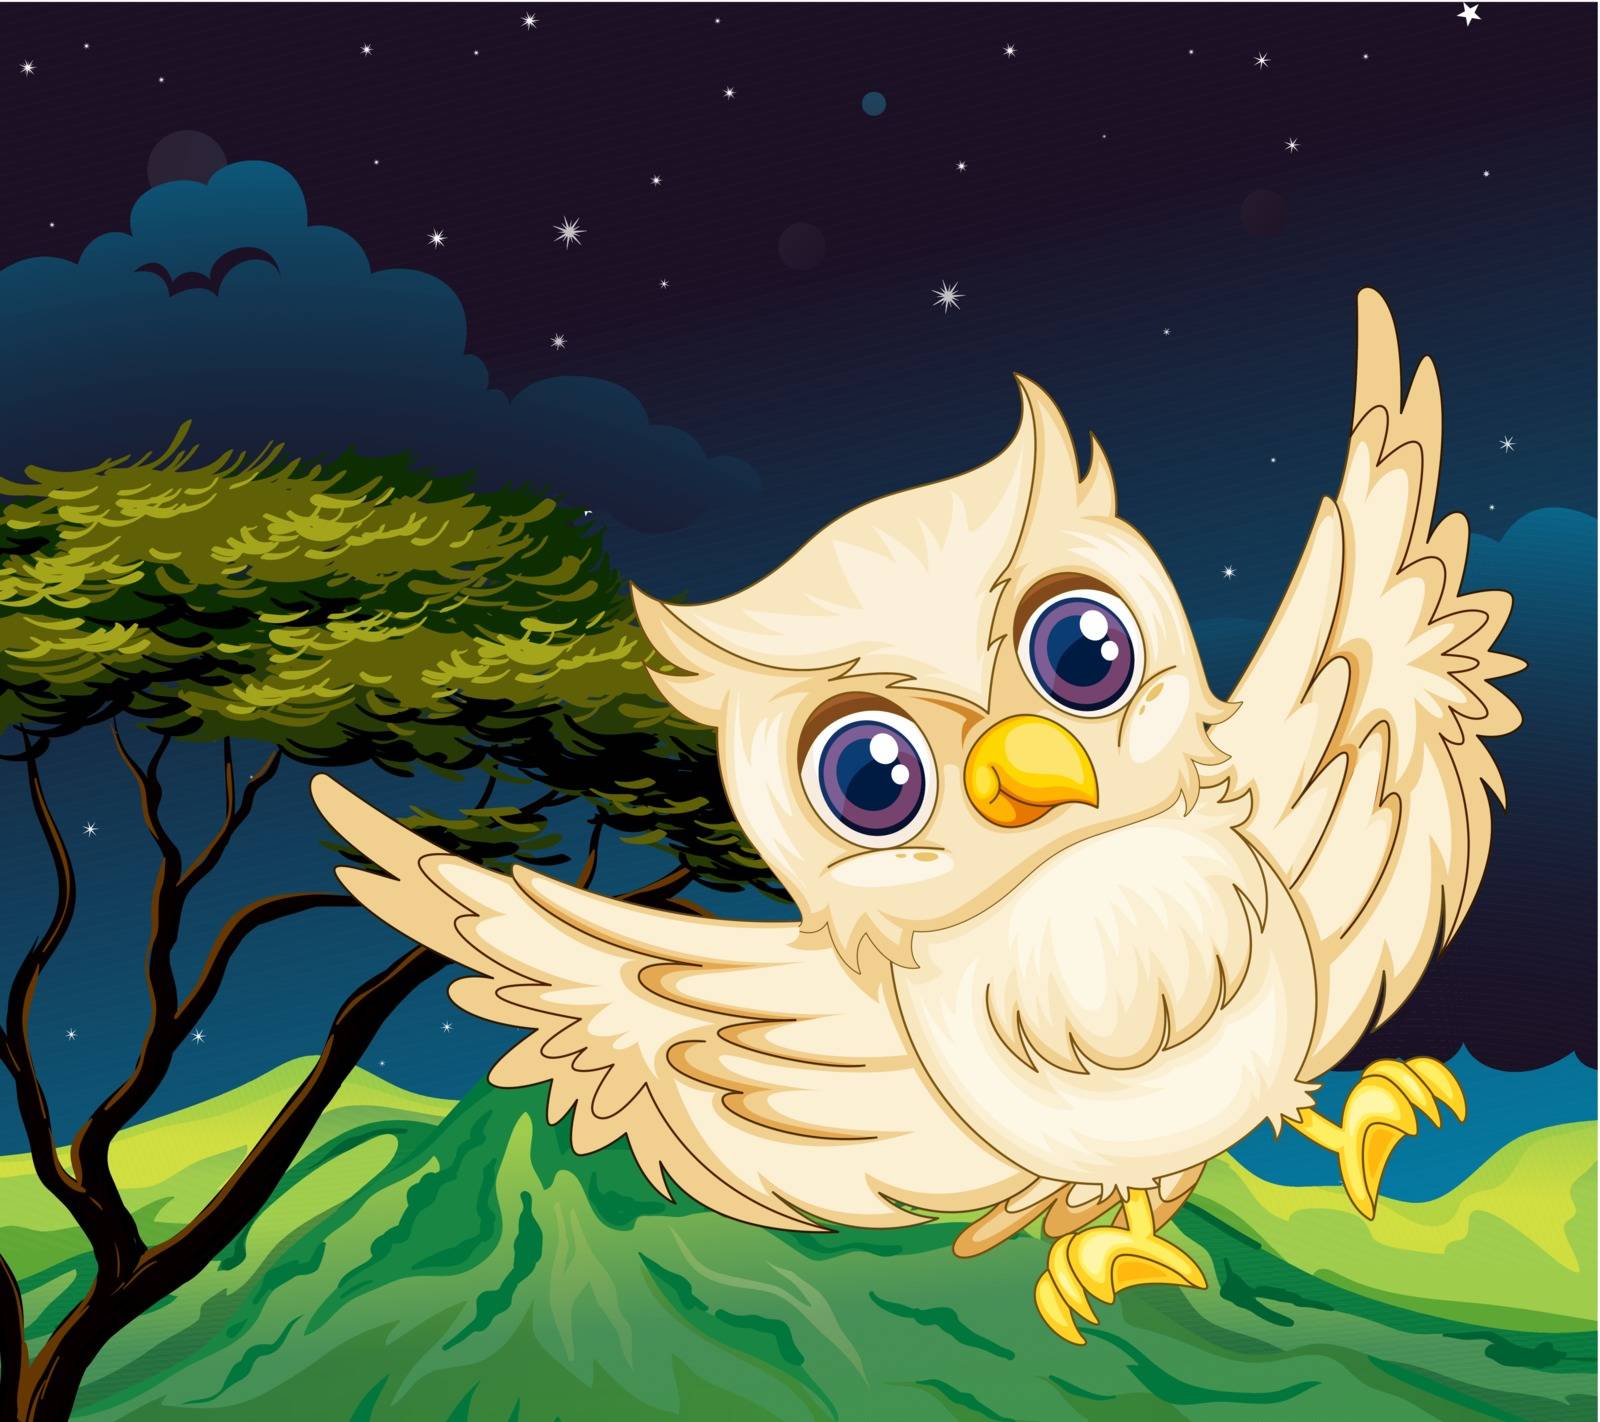 Illustration of a nocturnal creature